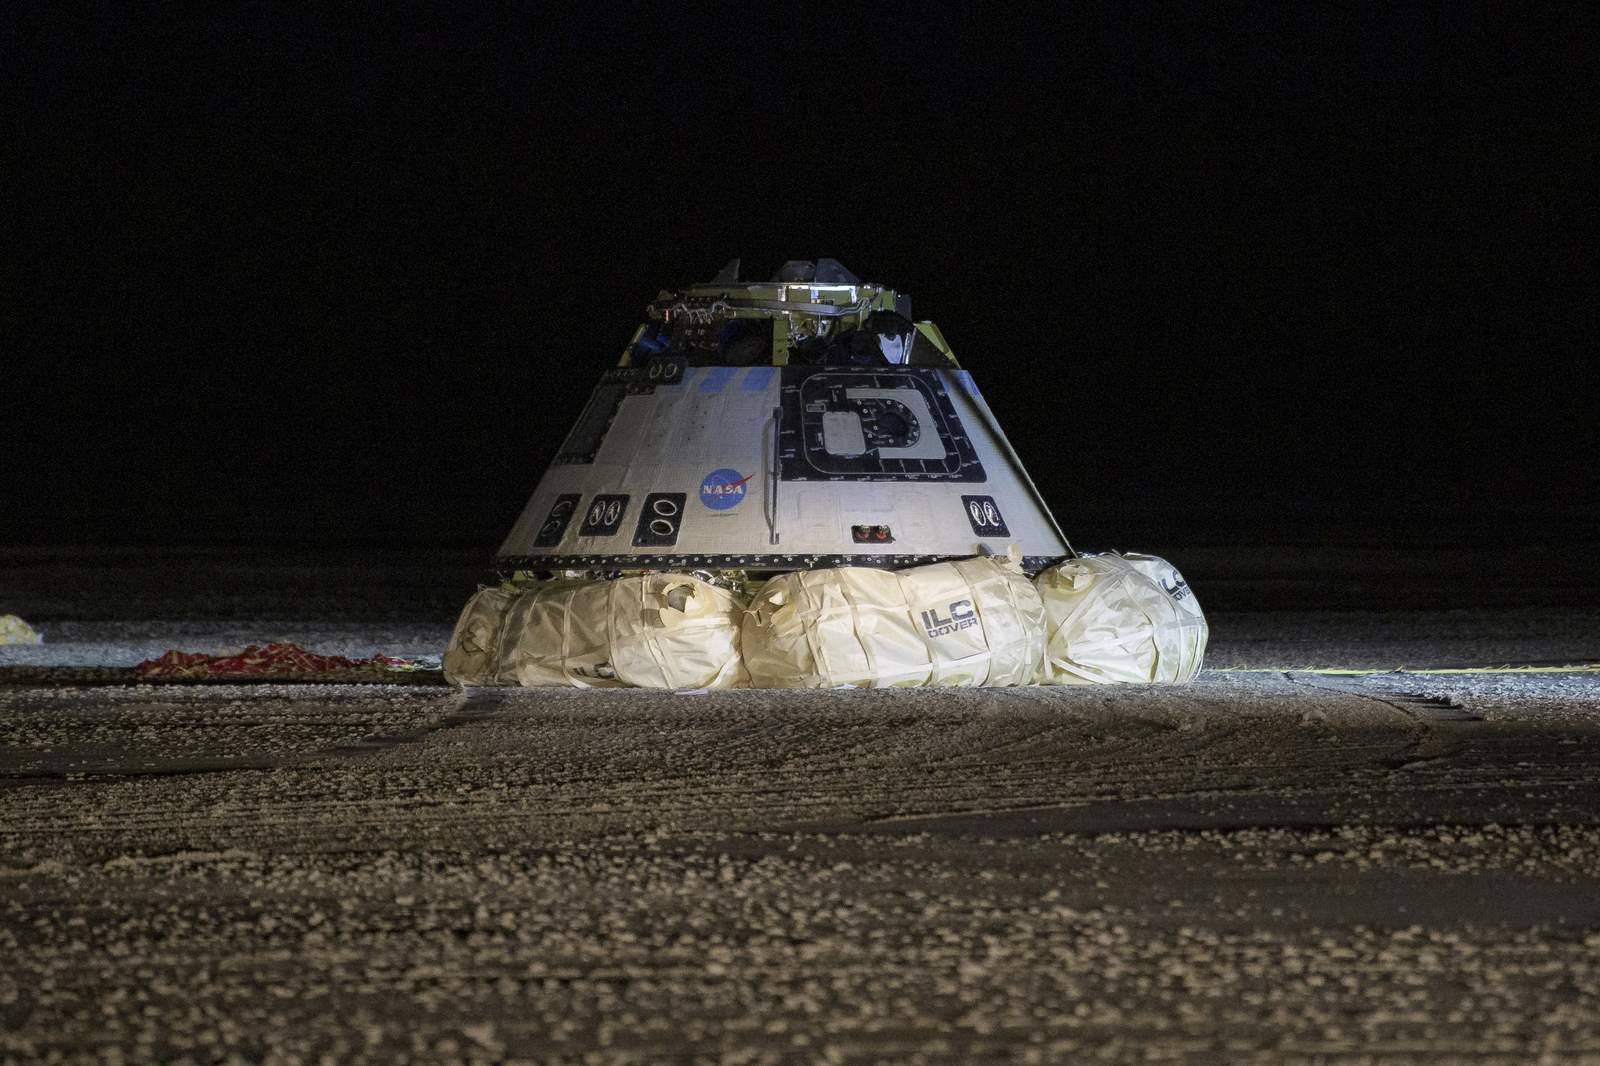 Boeing blames incomplete testing for astronaut capsule woes